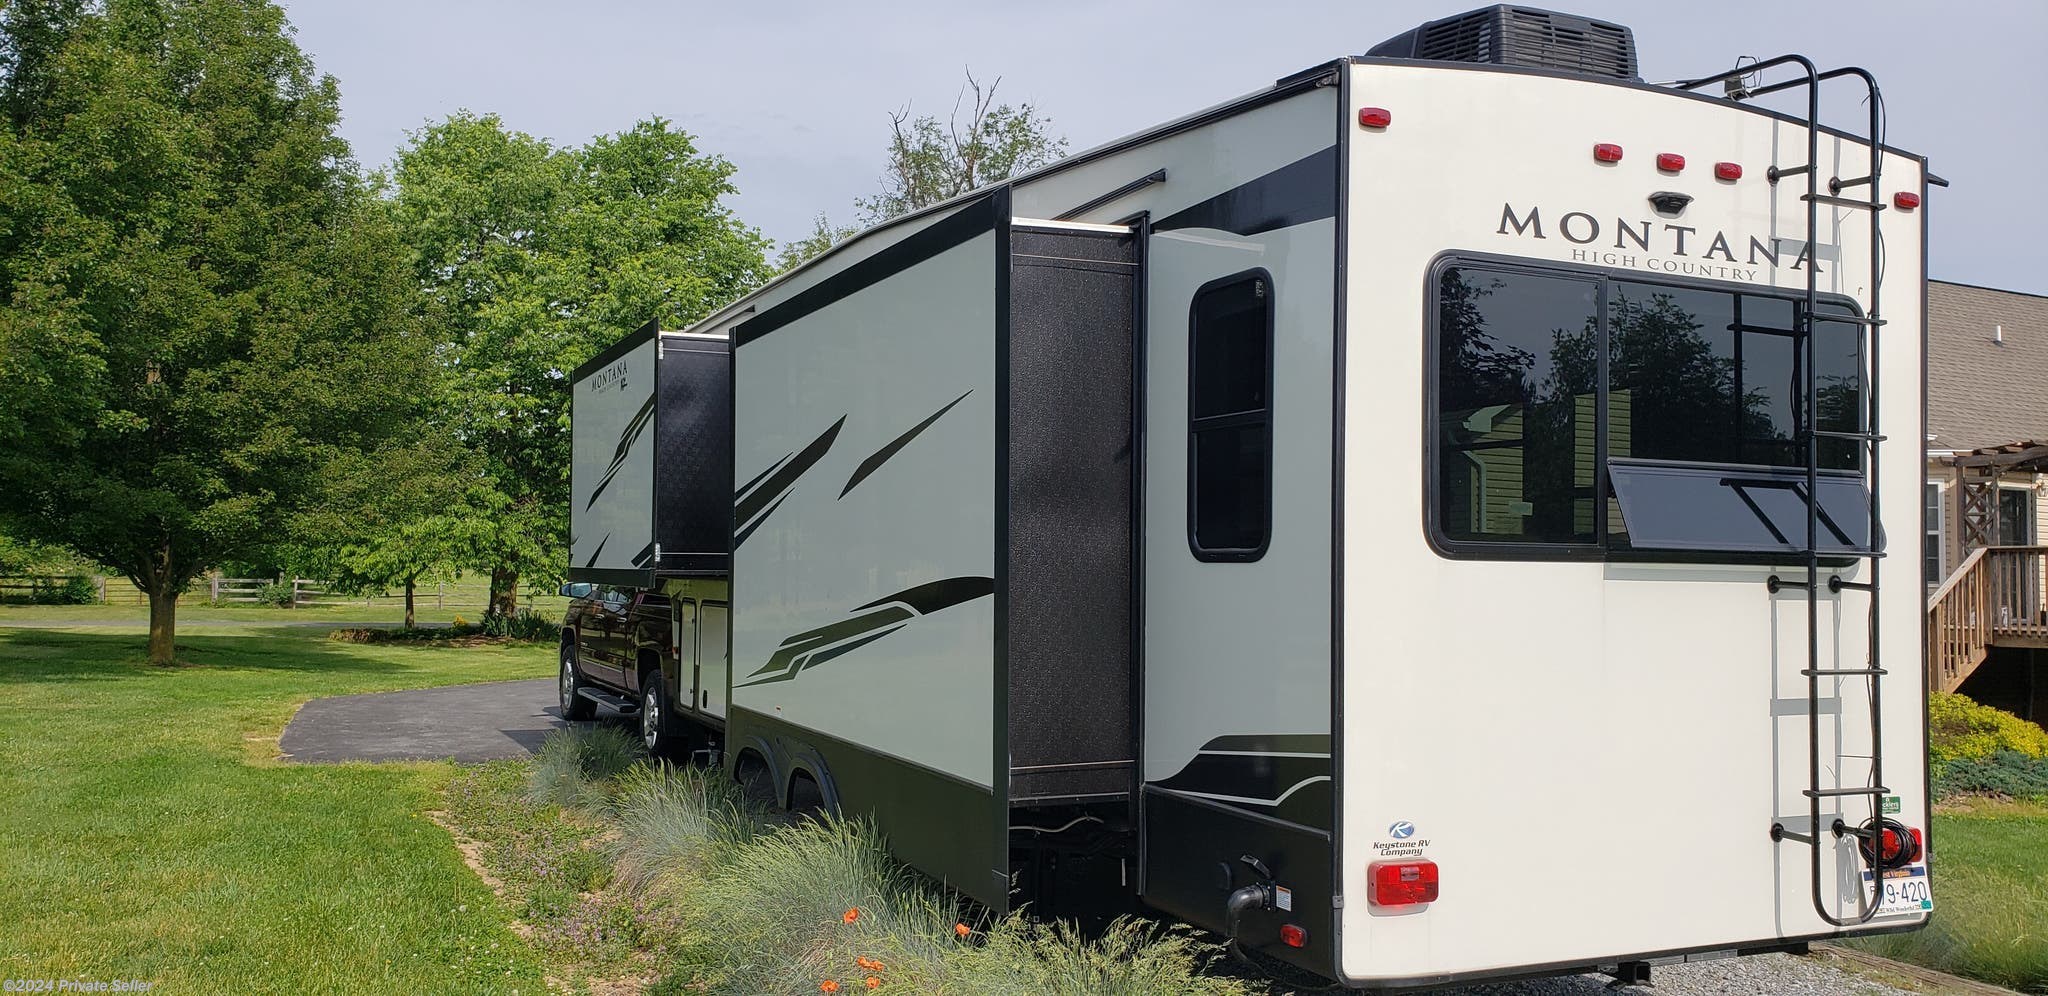 2020 Keystone Montana High Country 295RL RV for Sale in Charles Town, WV 25414 | | RVUSA.com 2020 Montana High Country 295rl For Sale